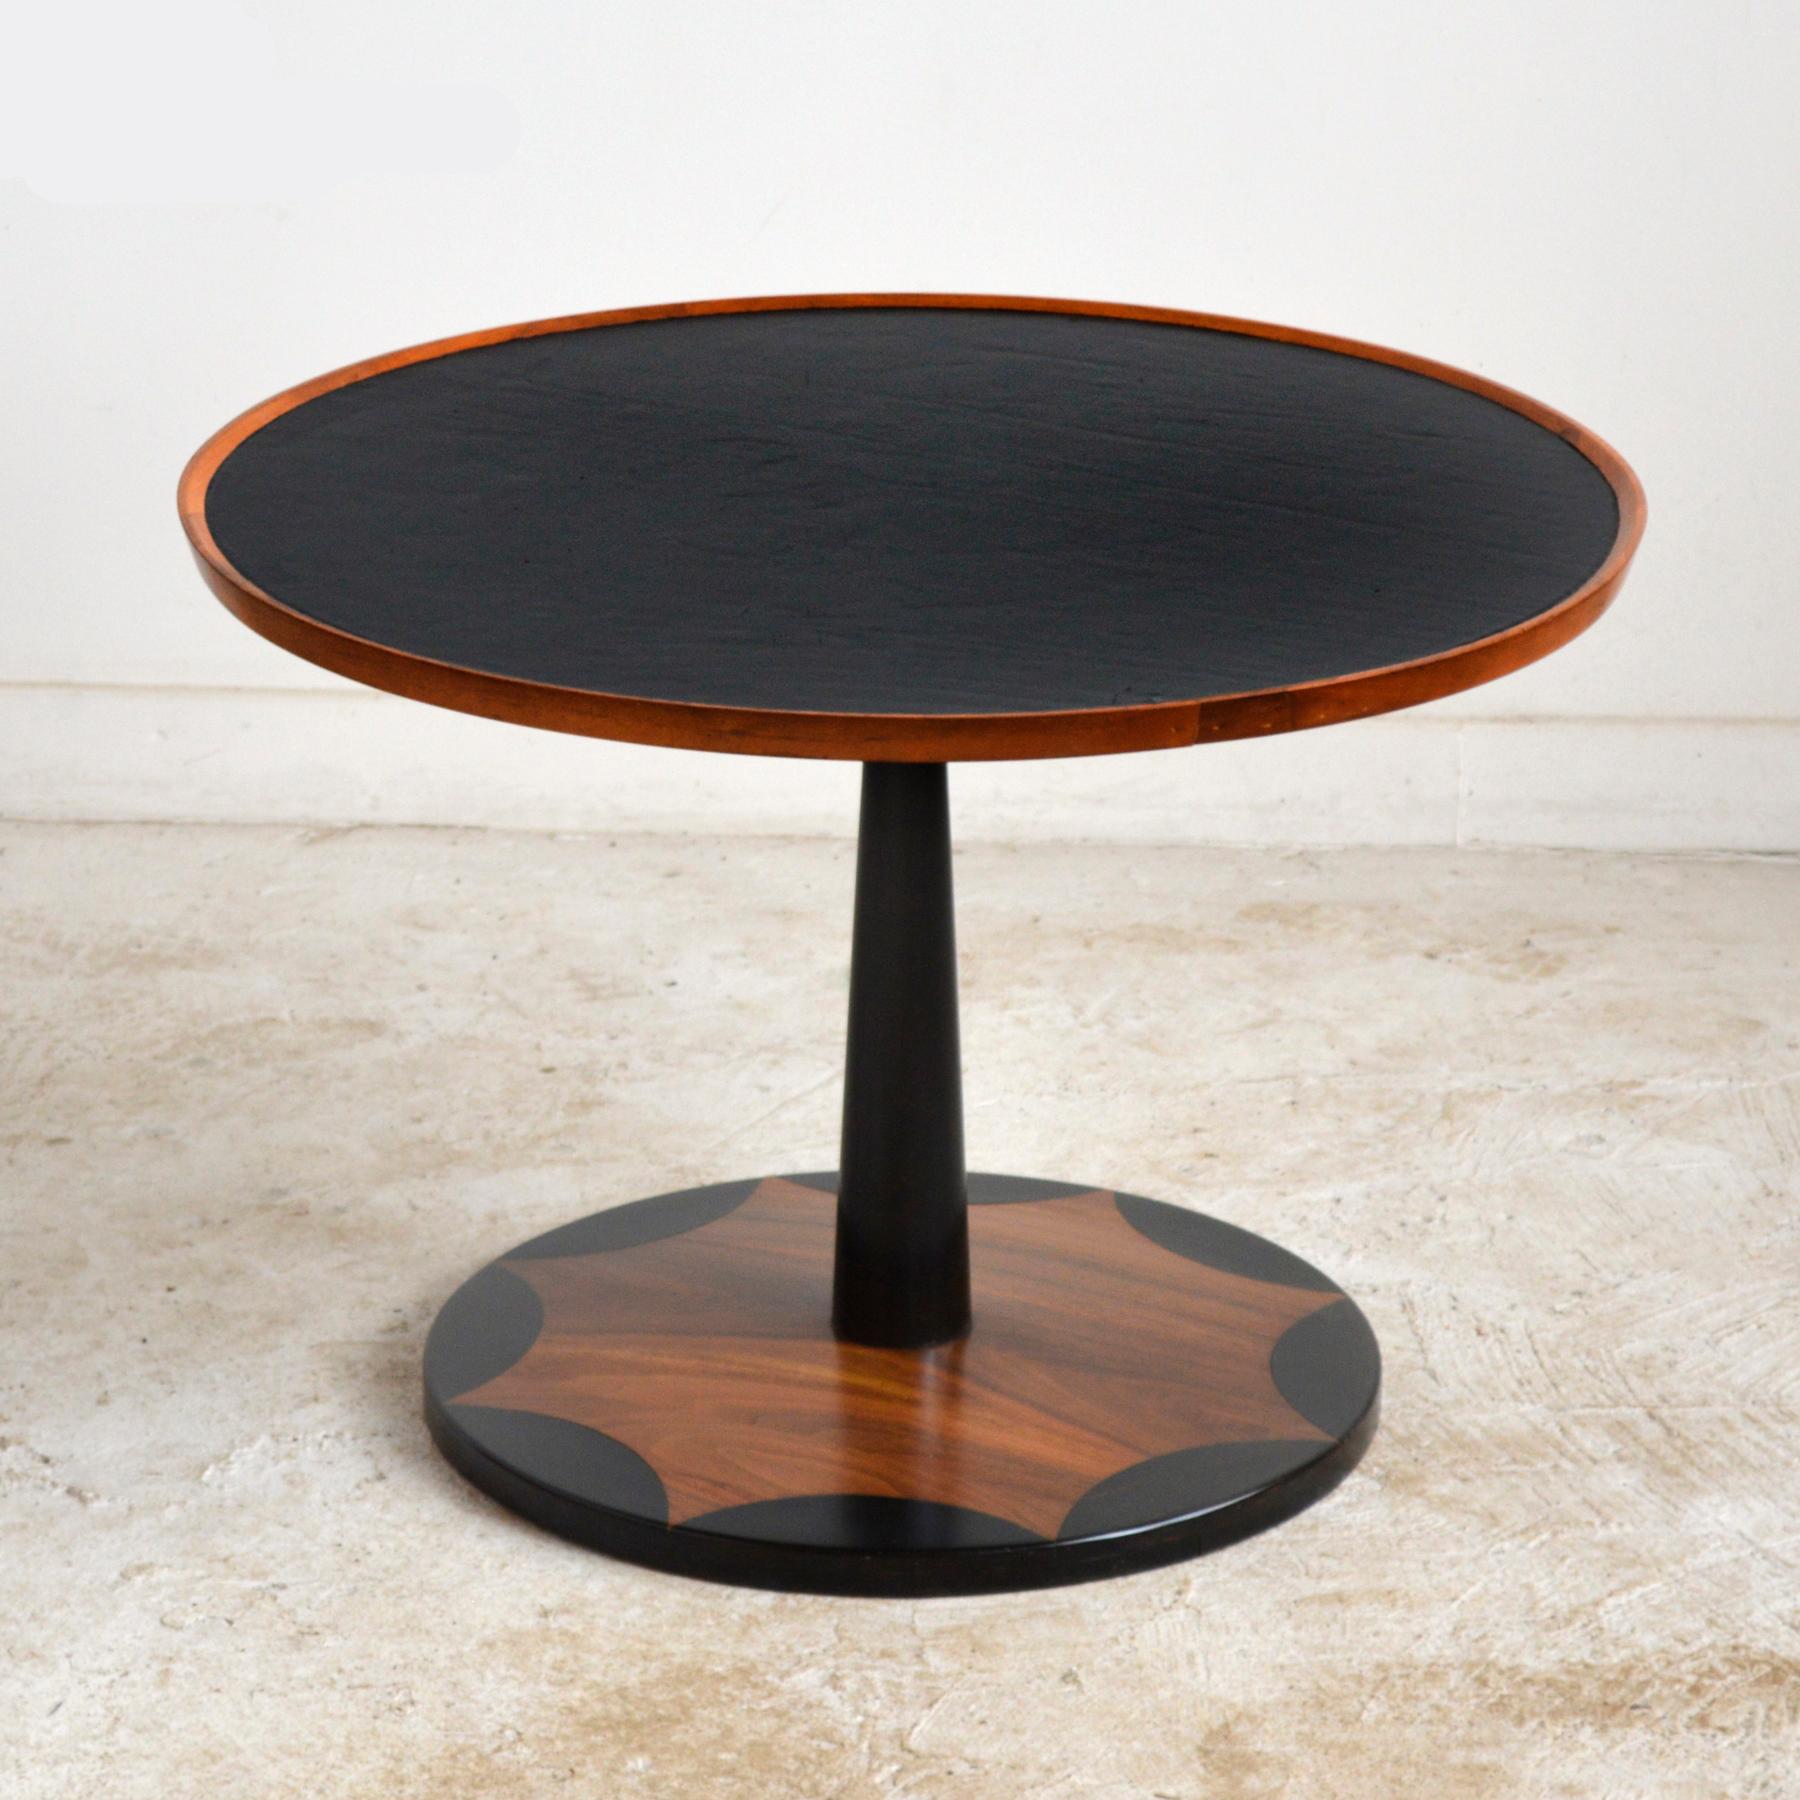 This wonderful early walnut table by Milo Baughman table by Arch Gordon has an ebony-inlaid base that supports an elegantly tapered black post which supports a top with a leather surface surrounded by a raised pie crust edge. The terrific scale